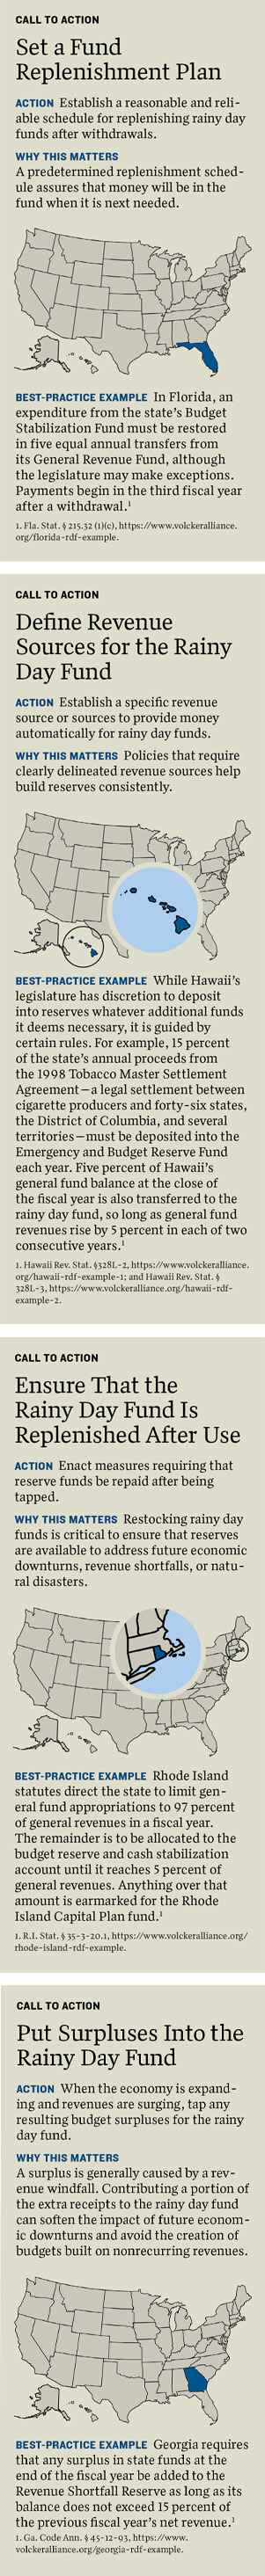 How to Effectively Use State Rainy Day Funds